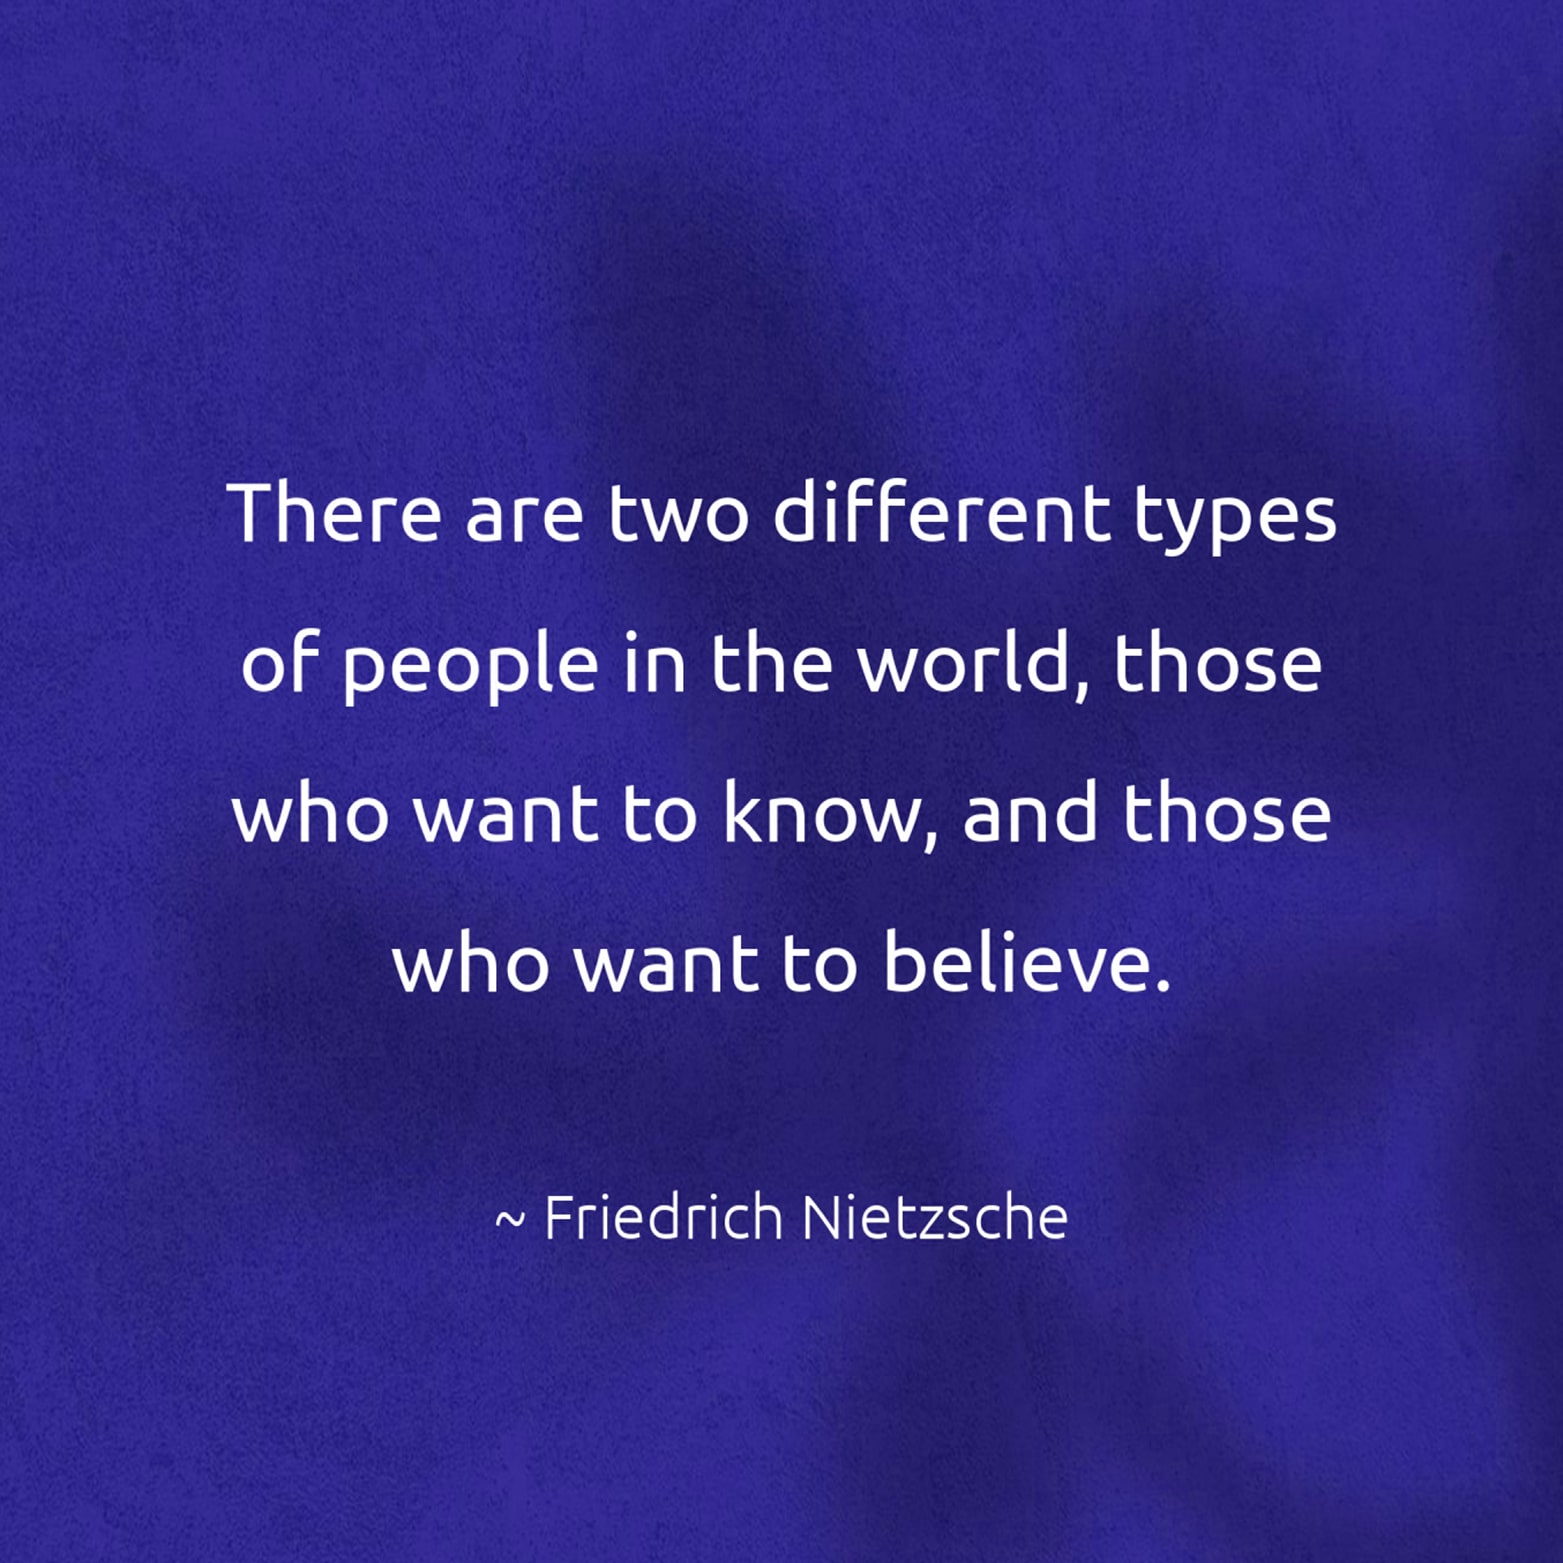 There are two different types of people in the world, those who want to know, and those who want to believe. - Friedrich Nietzsche